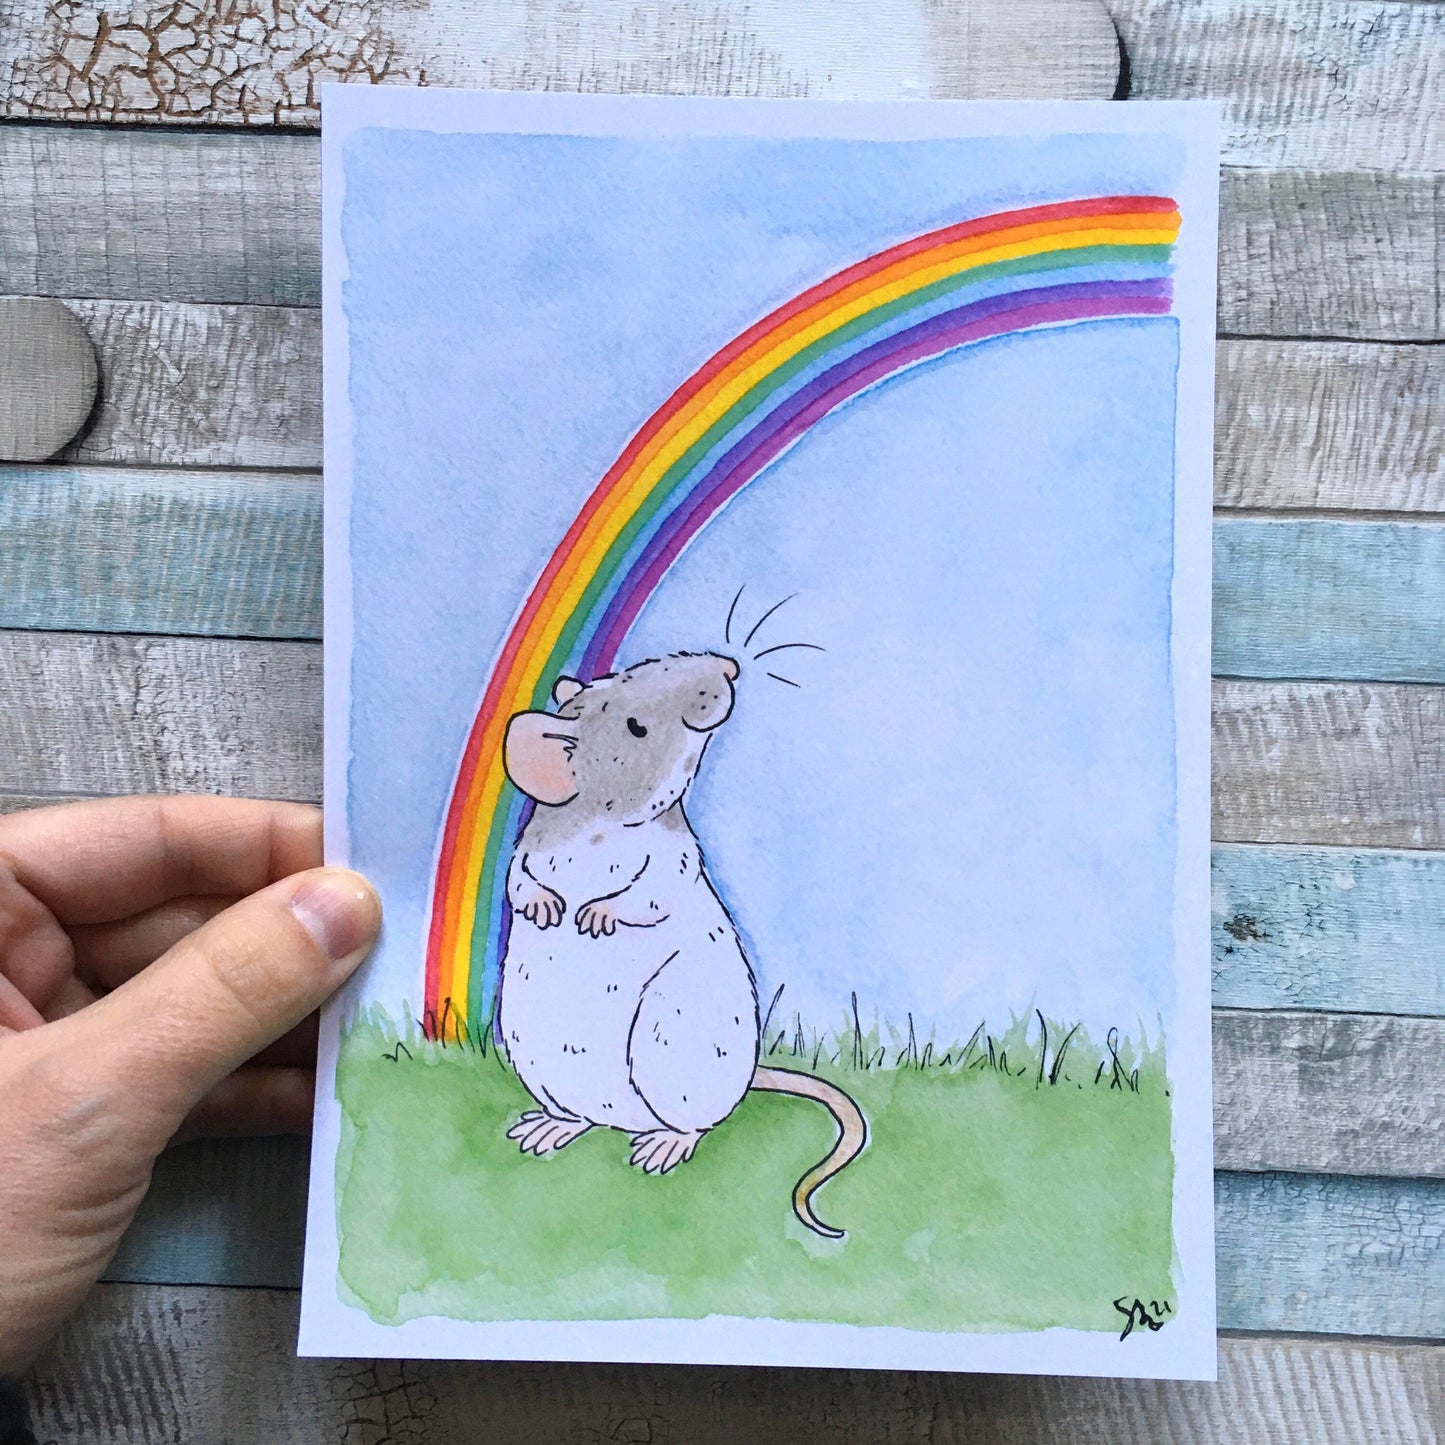 Hope Pet Rat Art Print, A5 Size Art Print With A Cute Capped Rat And Rainbow, Rat Lover Gift